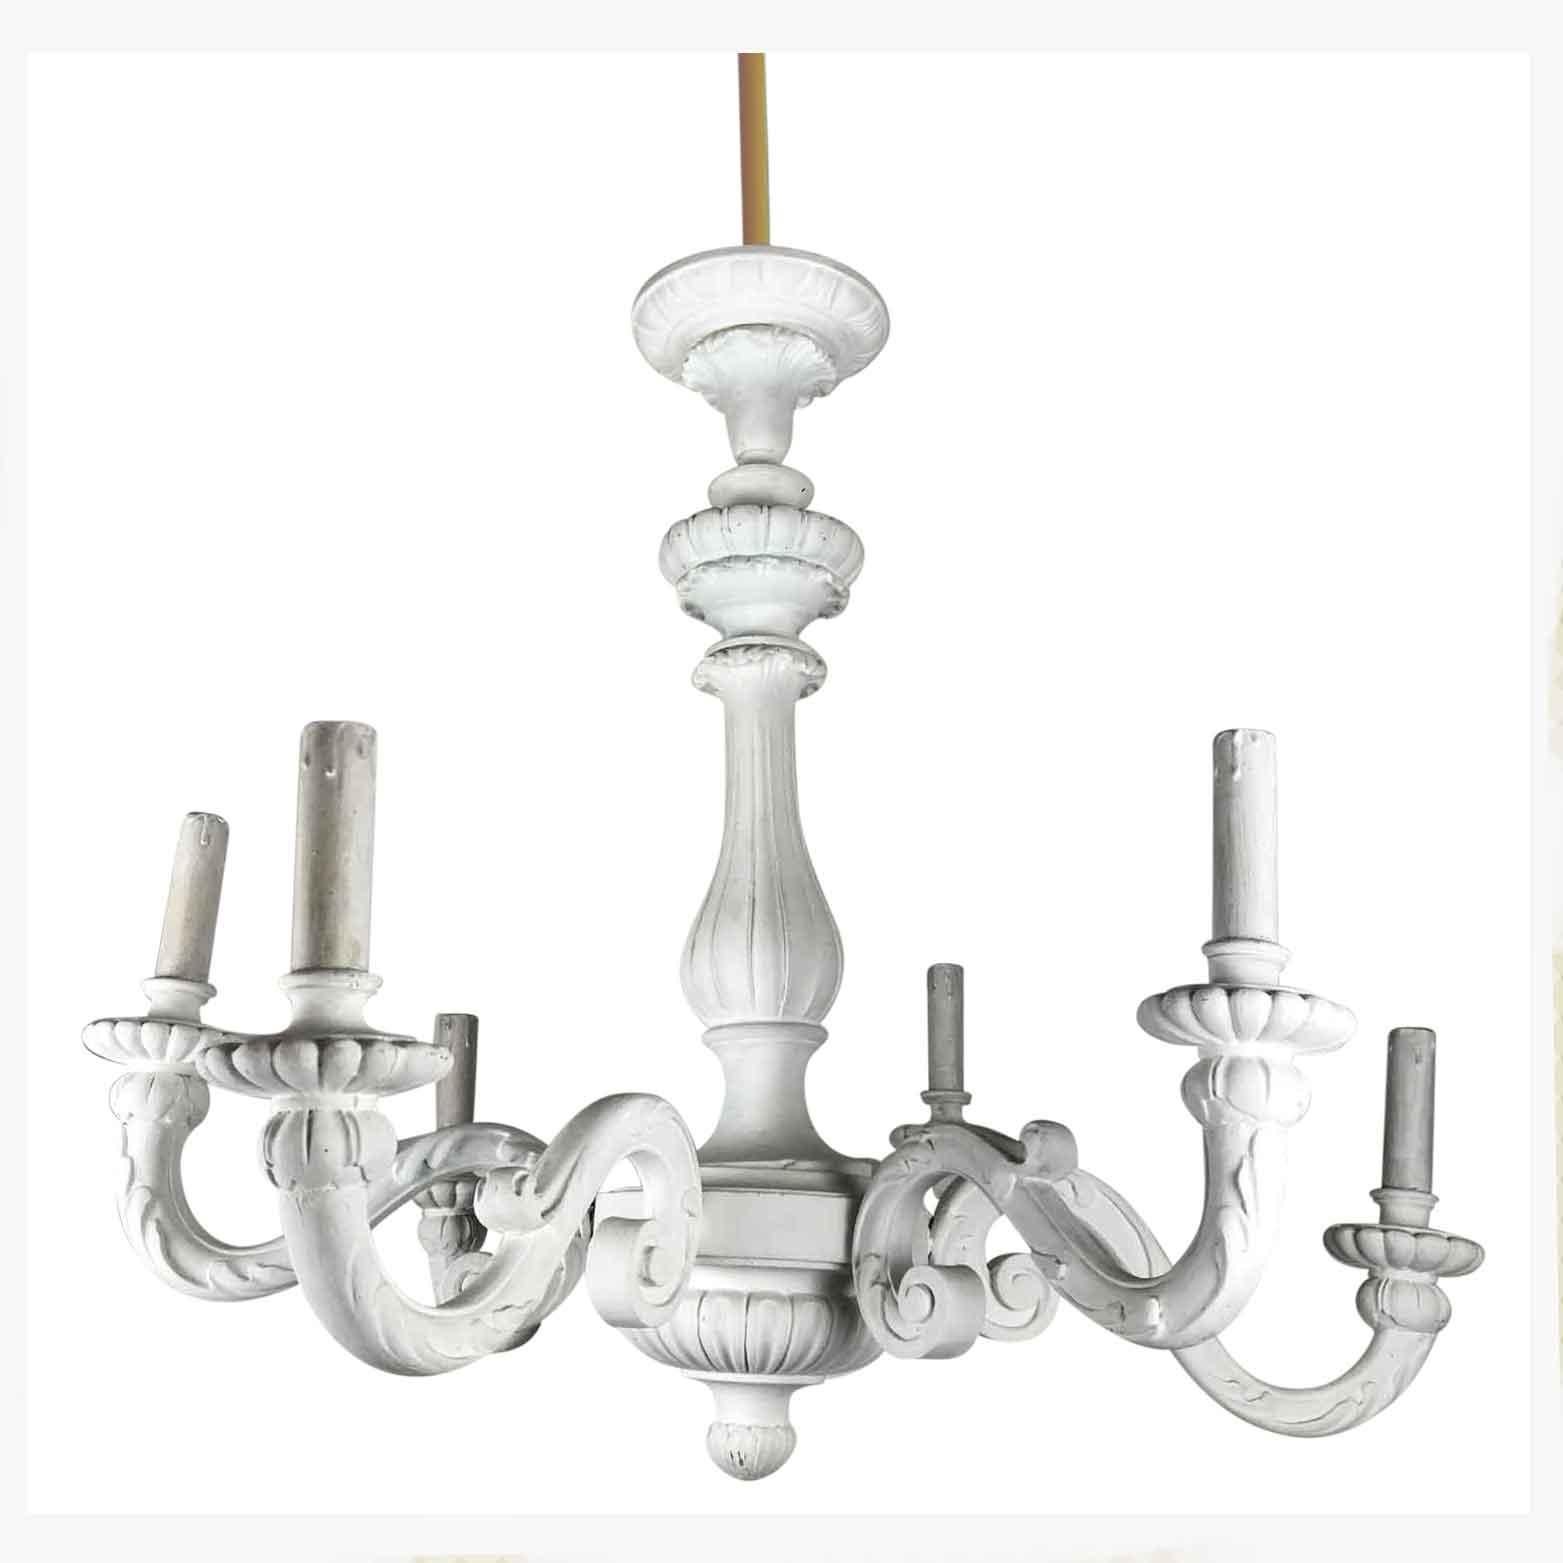 A 20th century Italian carved wood six-light chandelier with six scrolling curved arms, with central column.
The white painting finish is later, since originally this chandelier featured a gilt finish.
Working European standard wiring suitable for